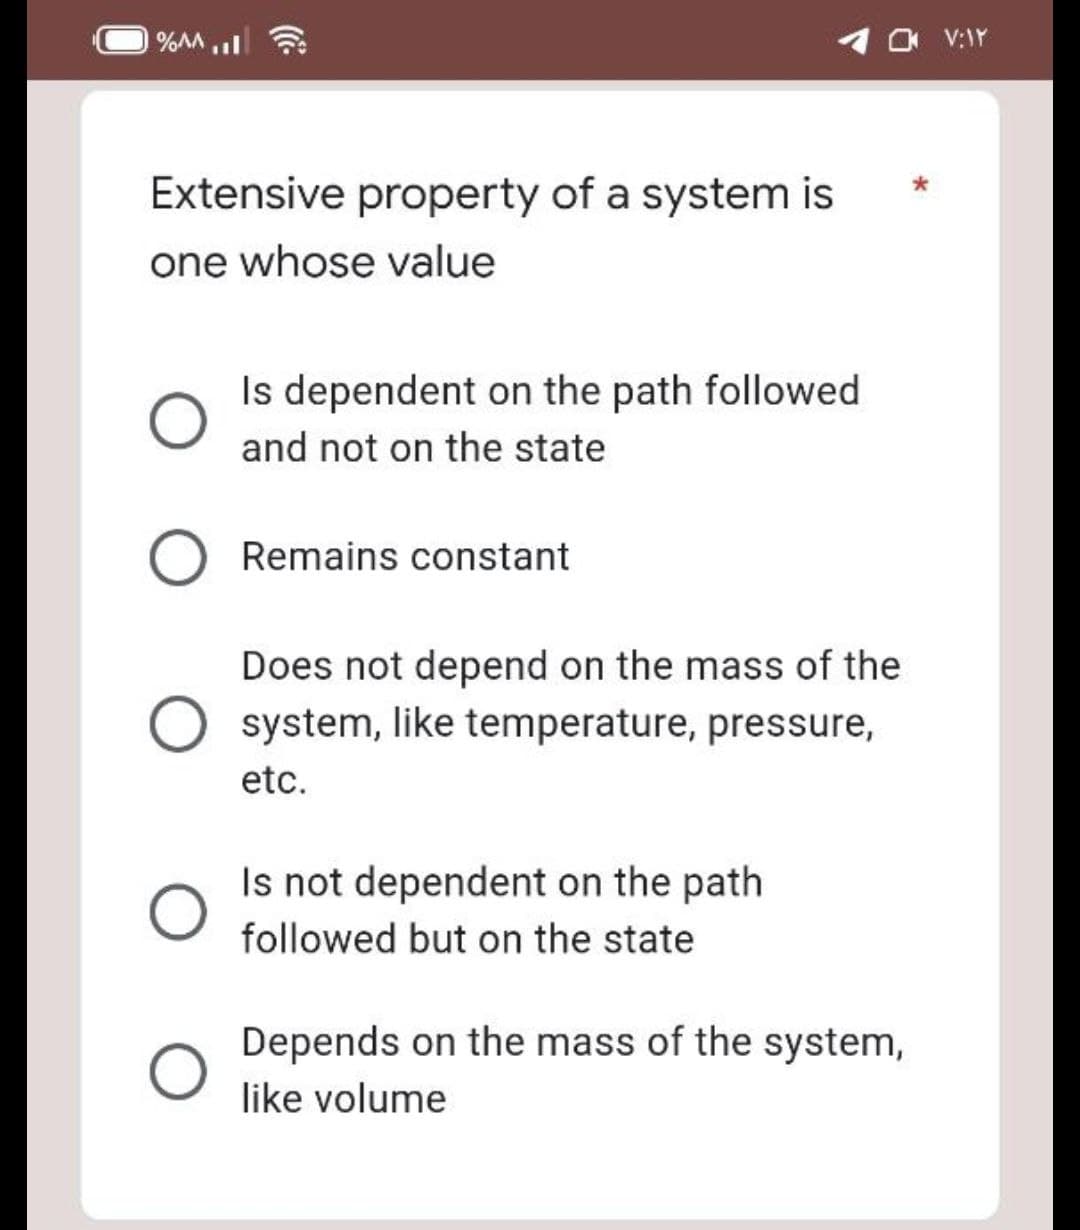 %^^.I
Extensive property of a system is
one whose value
Is dependent on the path followed
and not on the state
Remains constant
Does not depend on the mass of the
system, like temperature, pressure,
etc.
Is not dependent on the path
followed but on the state
Depends on the mass of the system,
like volume
- ۷:۱۲